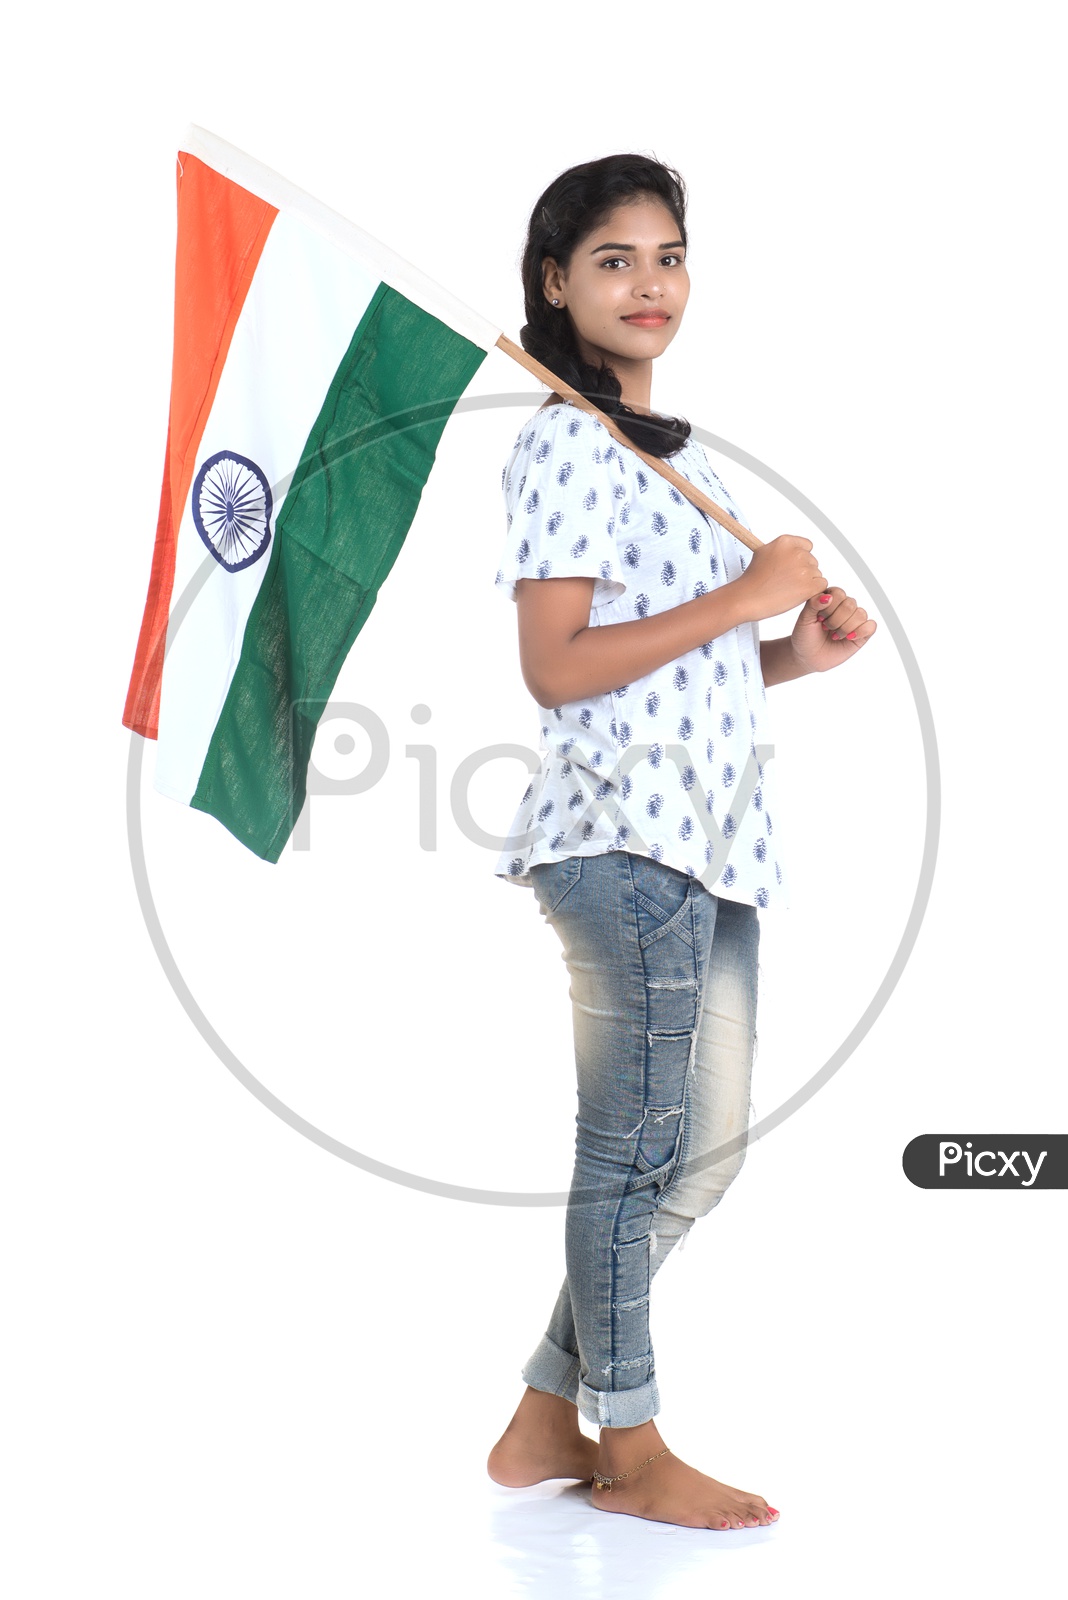 Girl Holding Indian National Flag or tricolour Flag In hand and Standing And Posing On a White Background